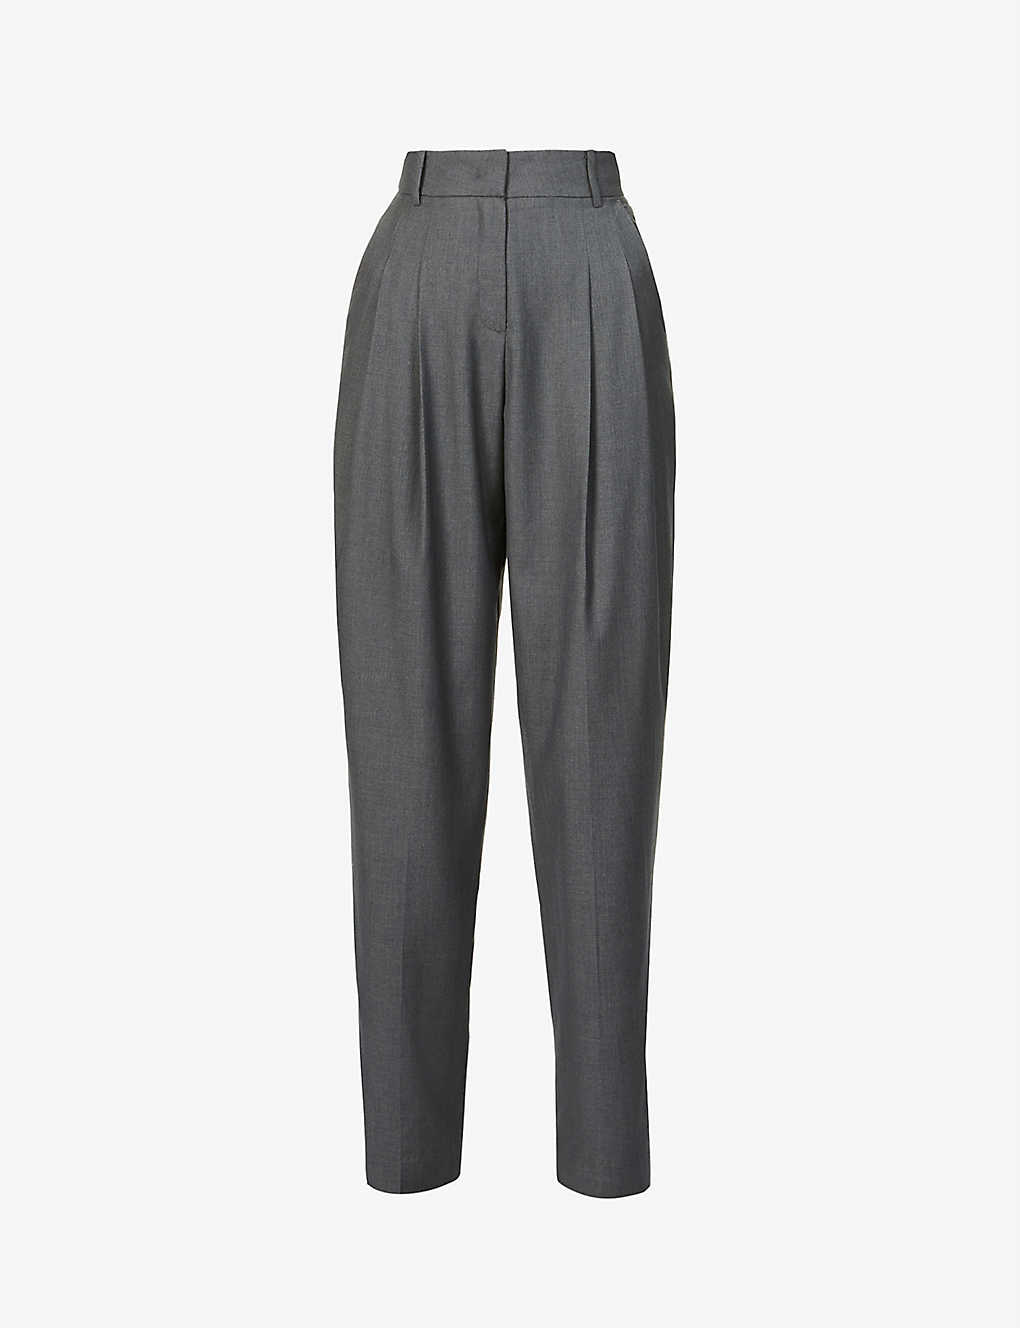 The Frankie Shop Gelso High-rise Pleated Woven Trousers In Grey